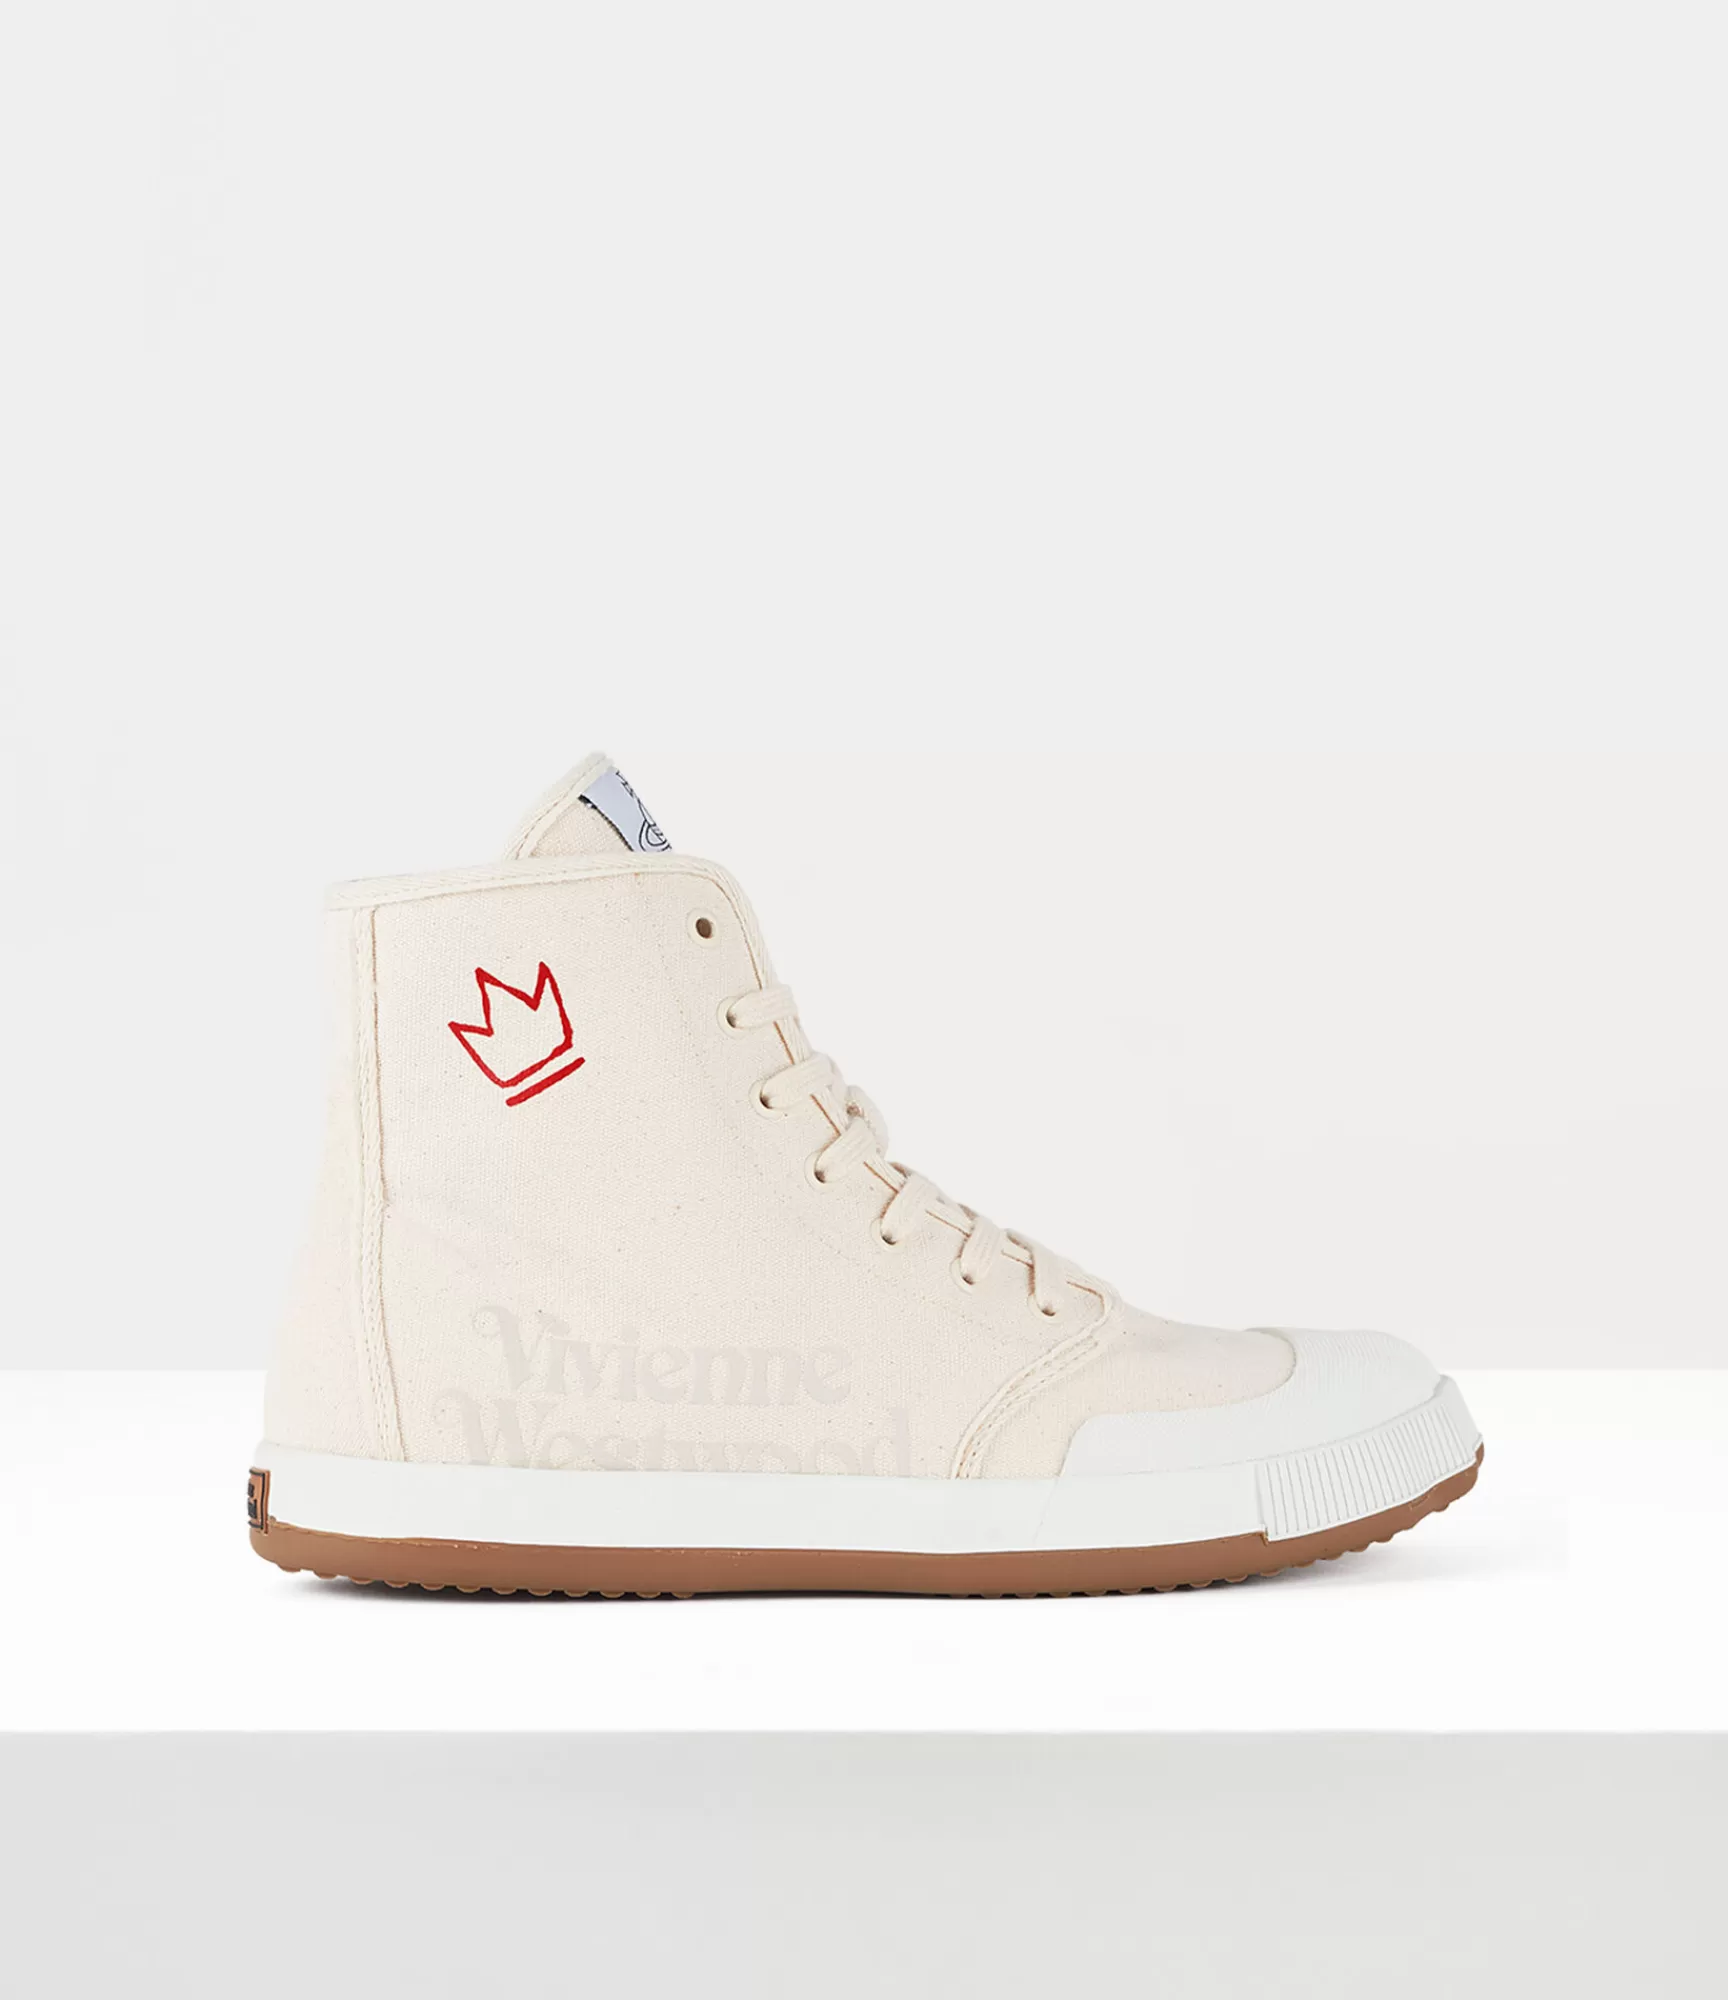 Vivienne Westwood Trainers*Animal gym high top Natural